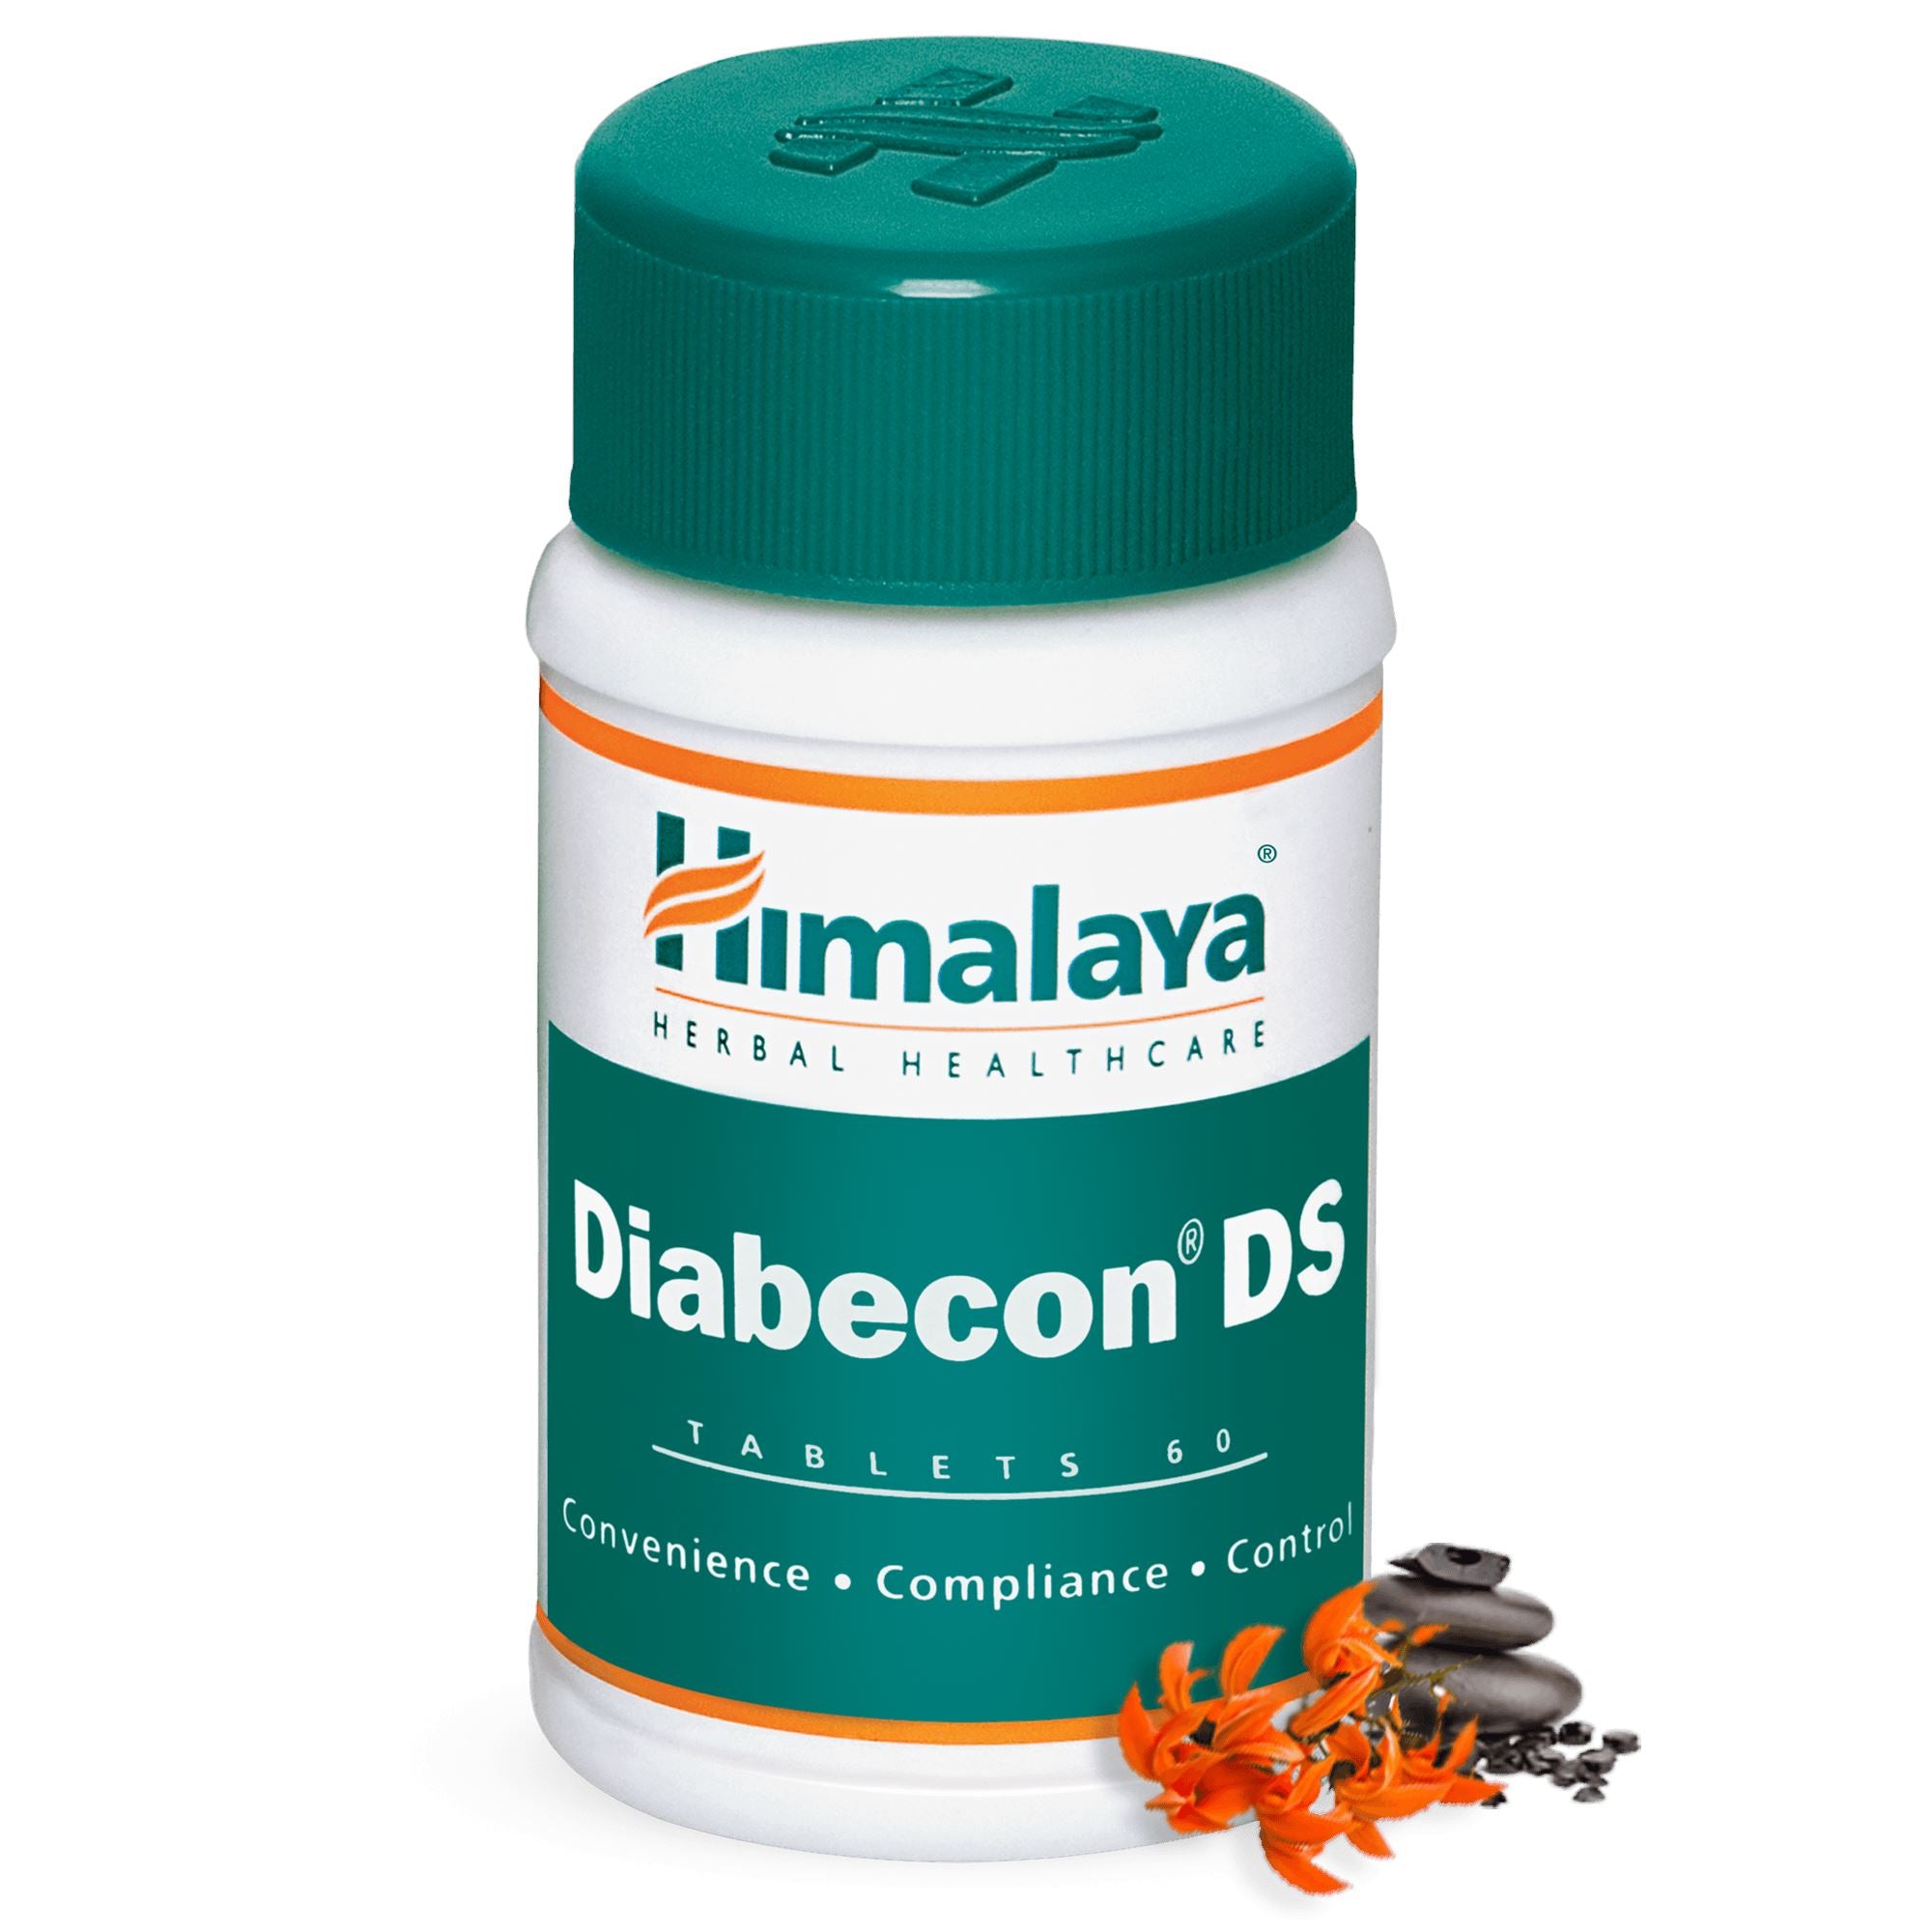 Himalaya Diabecon (DS) - Tablets to reducing excessive blood sugar levels